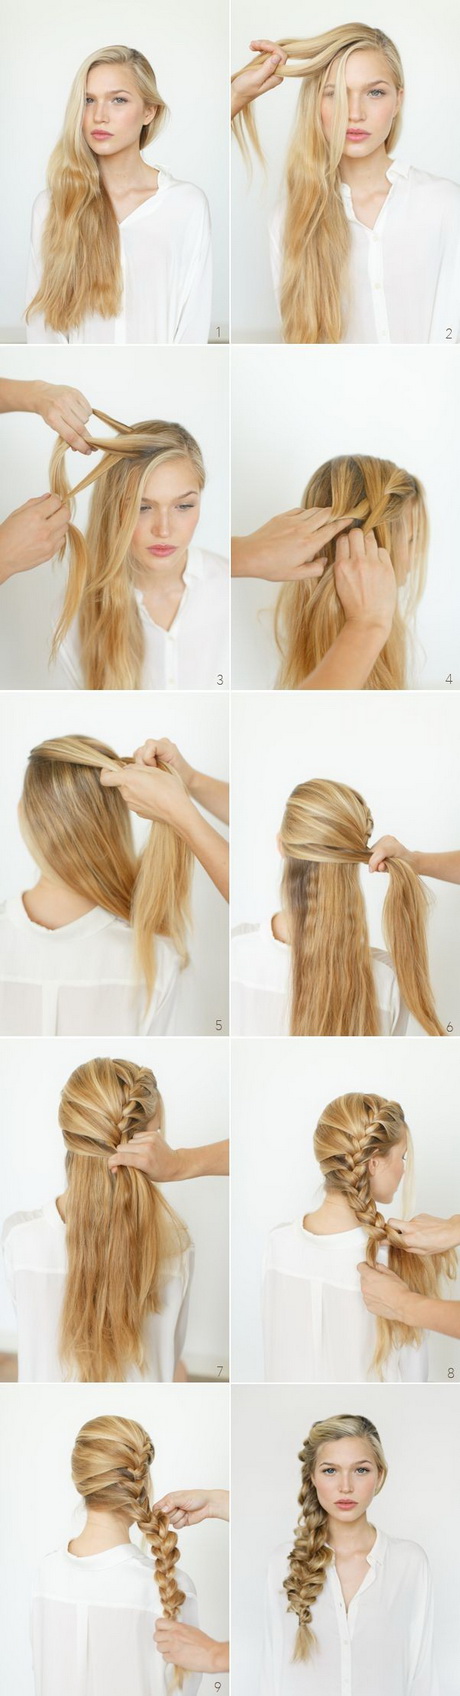 Step by step hairstyles for long hair step-by-step-hairstyles-for-long-hair-62-5